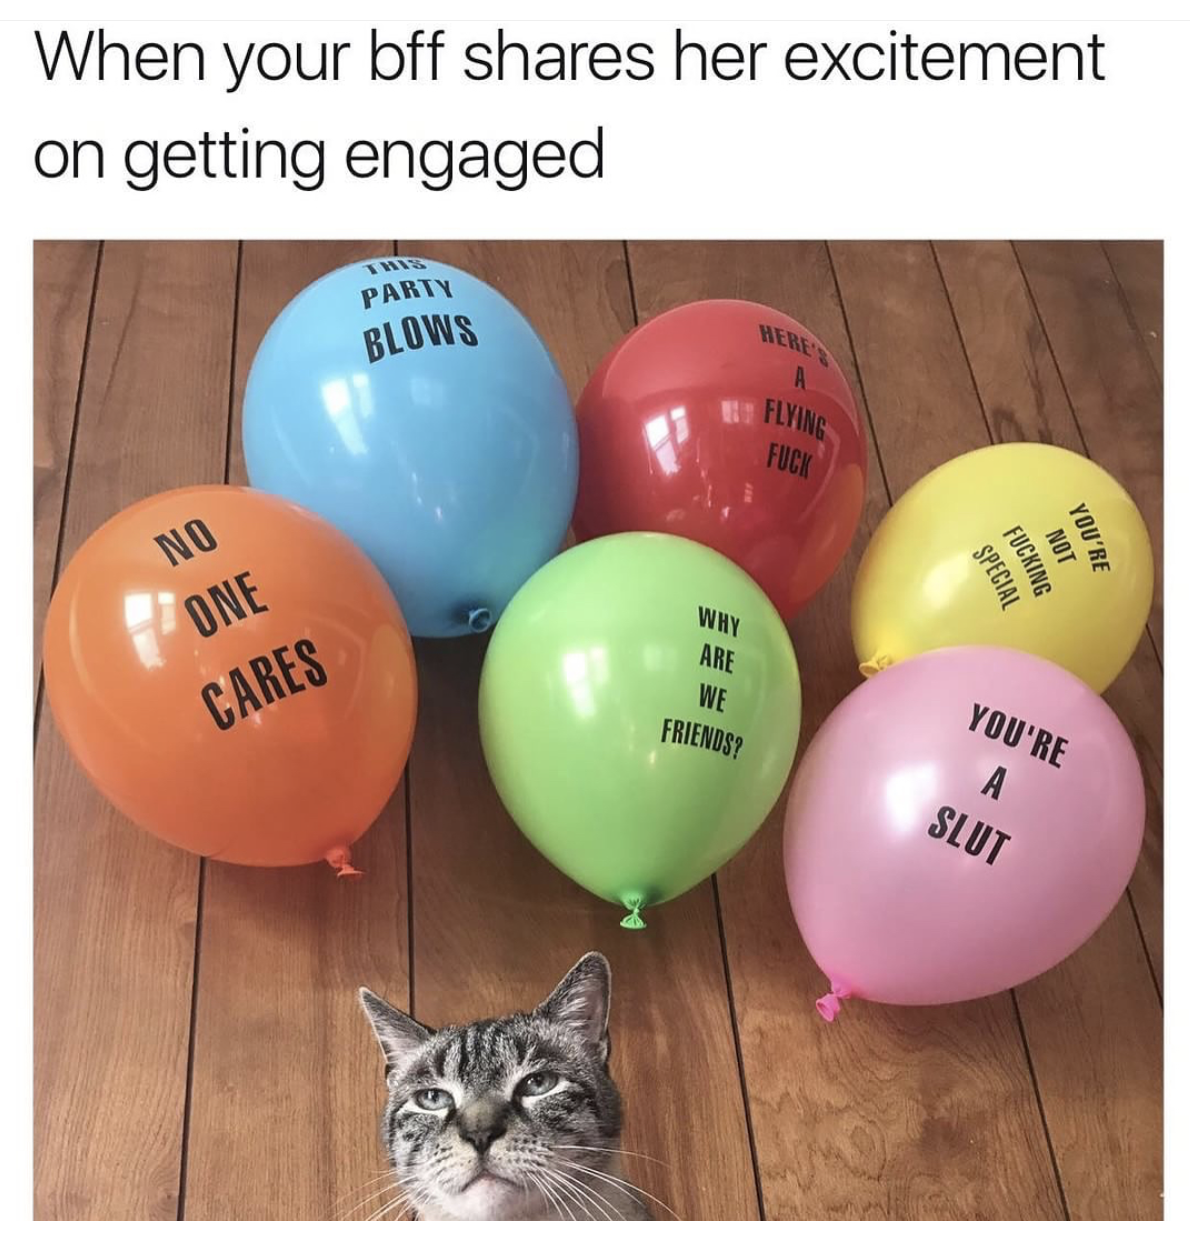 shitty balloons - When your bff her excitement on getting engaged Party Blows Fly No Special Fucking Not You'Re Wm Are One Cares You'Re Friends Slut